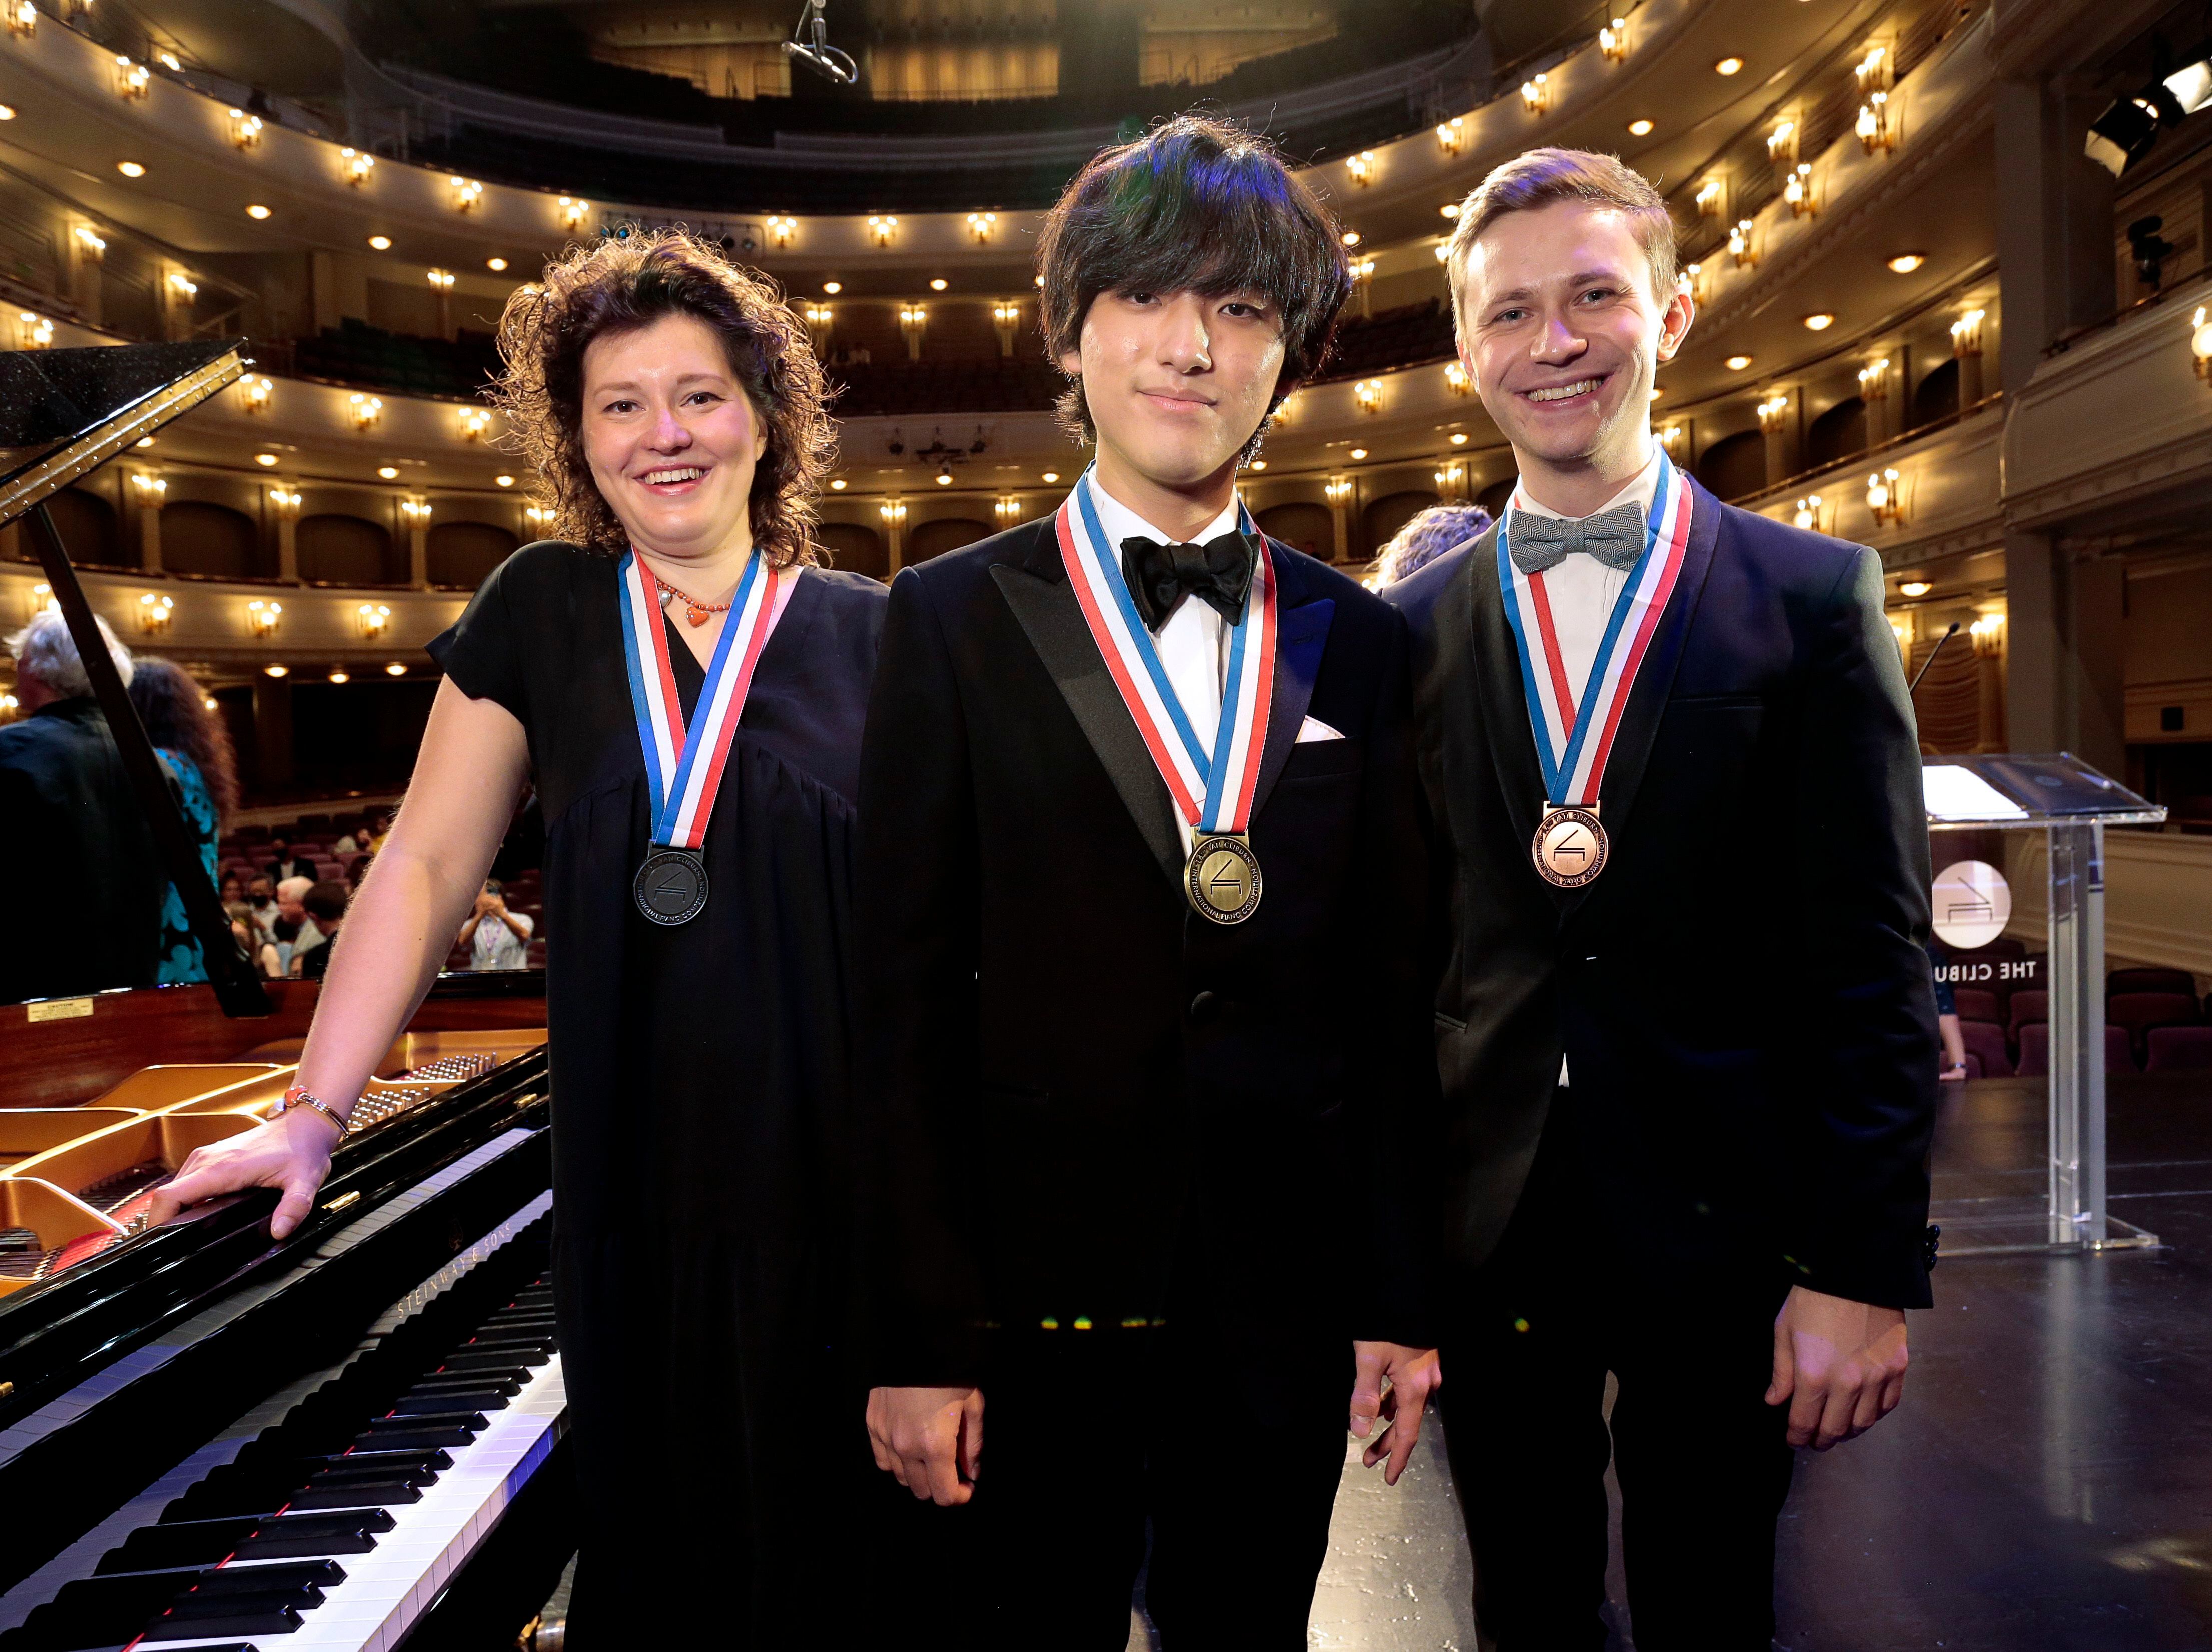 Pianist, 18, from South Korea wins Van Cliburn competition